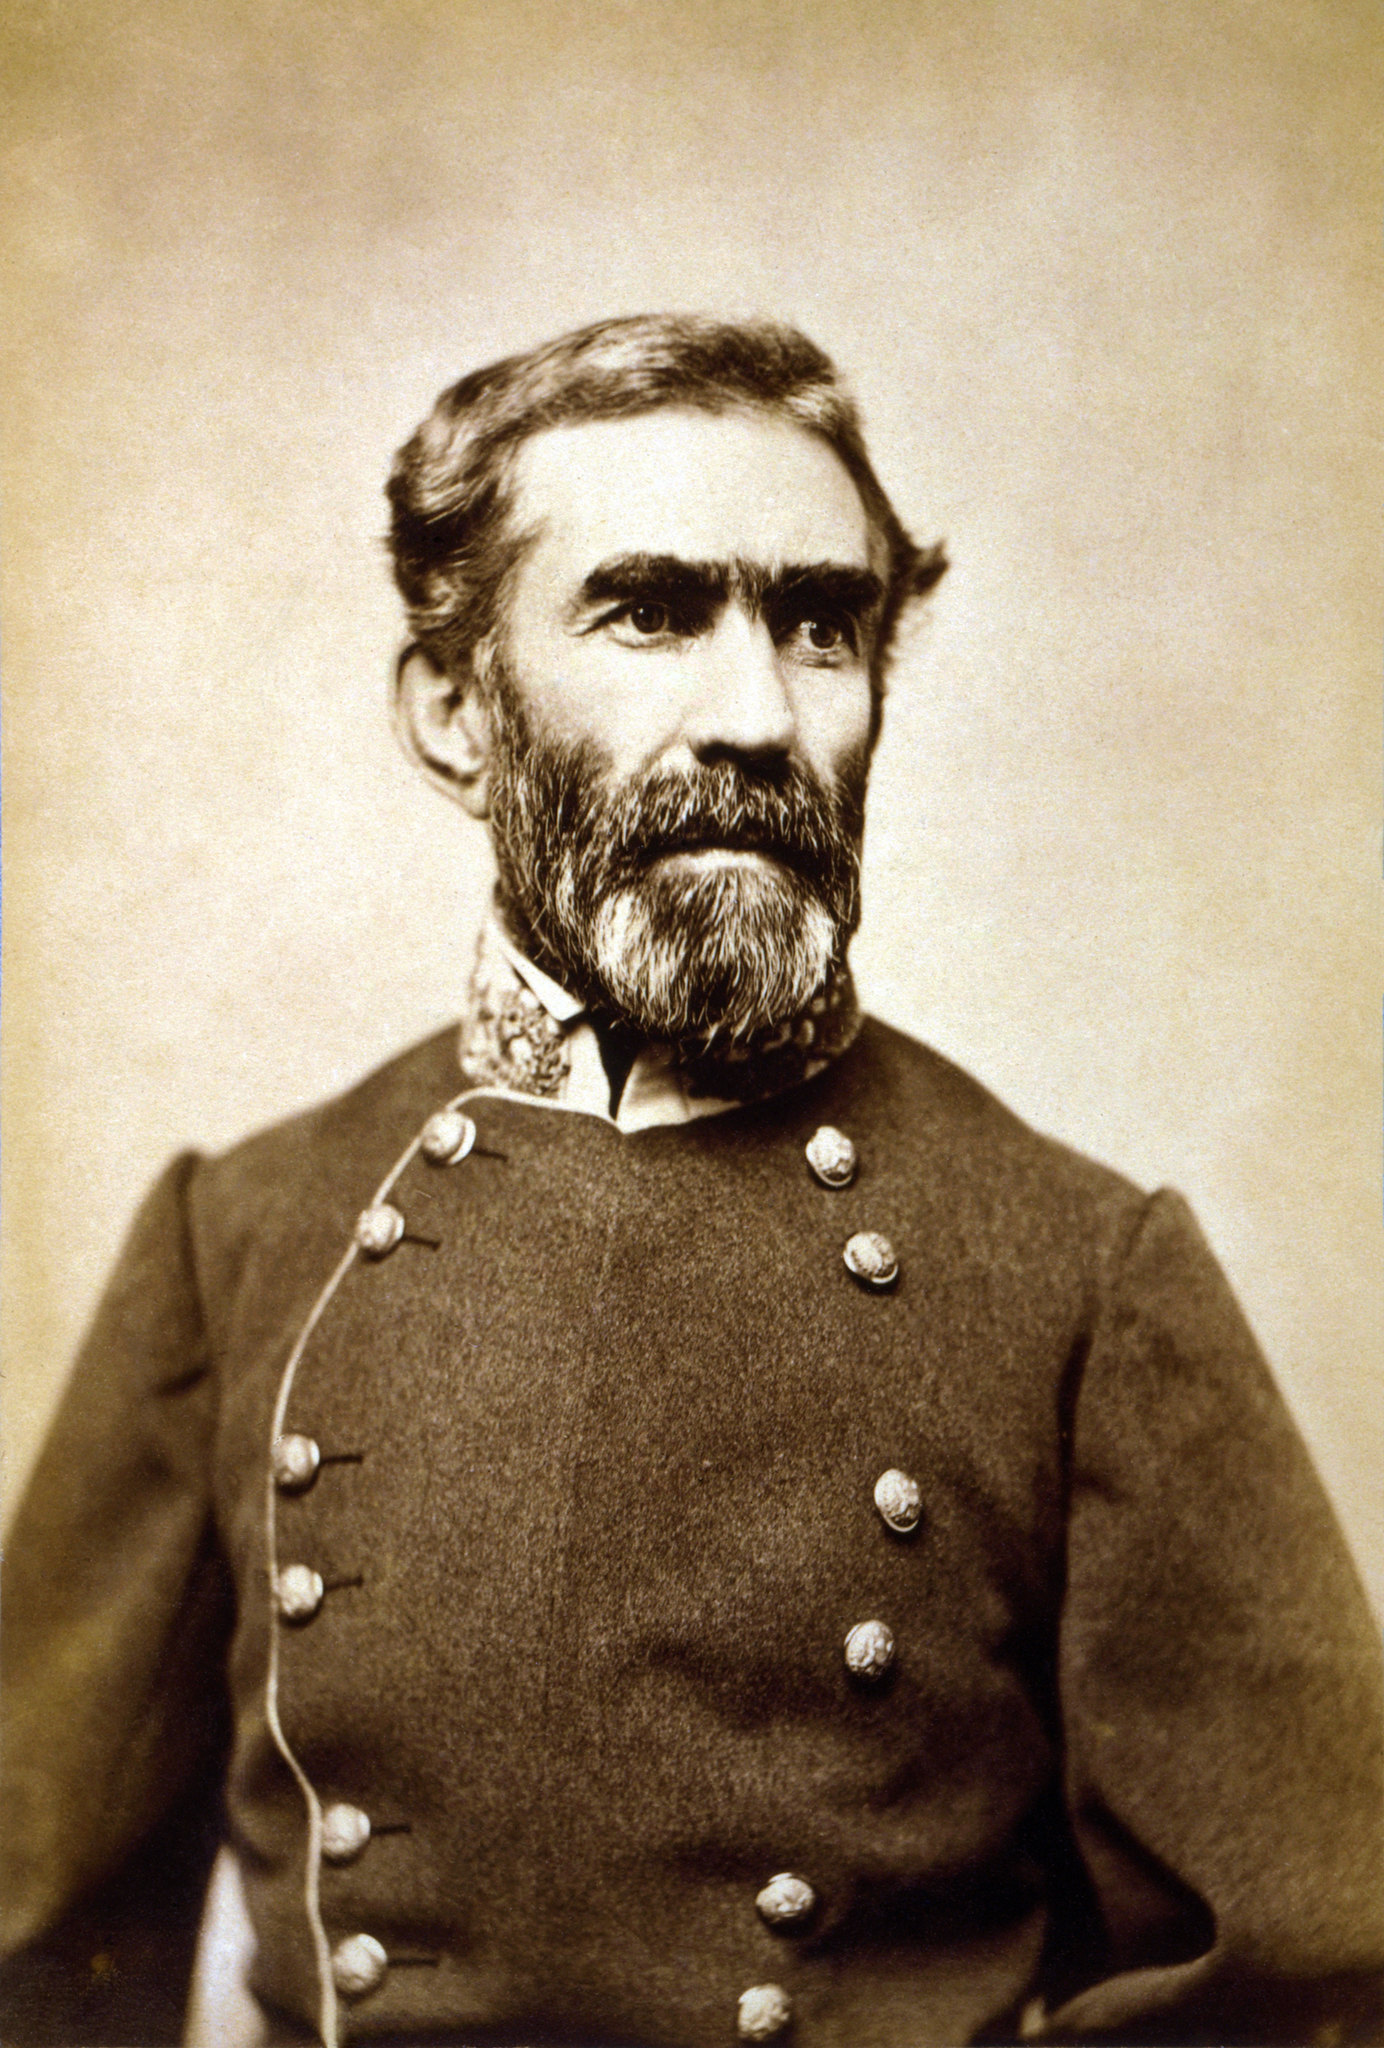 Braxton Bragg (March 22, 1817 – September 27, 1876) was a career United States Army officer, and then a general in the Confederate States Army